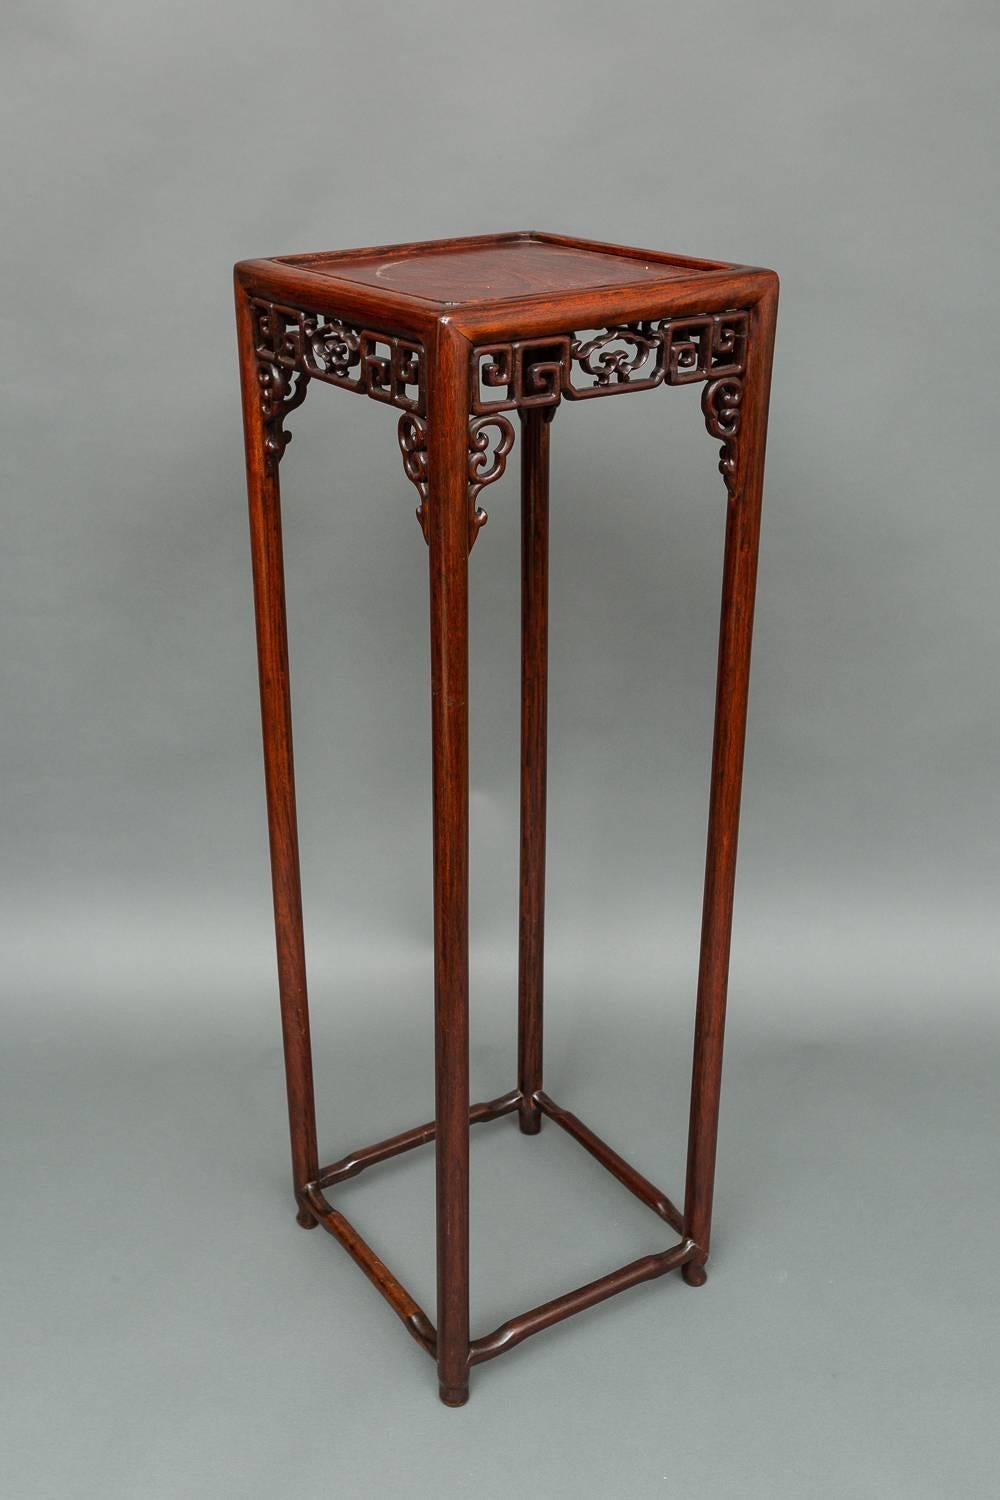 Chinese 19th century tall stand with fretwork apron.